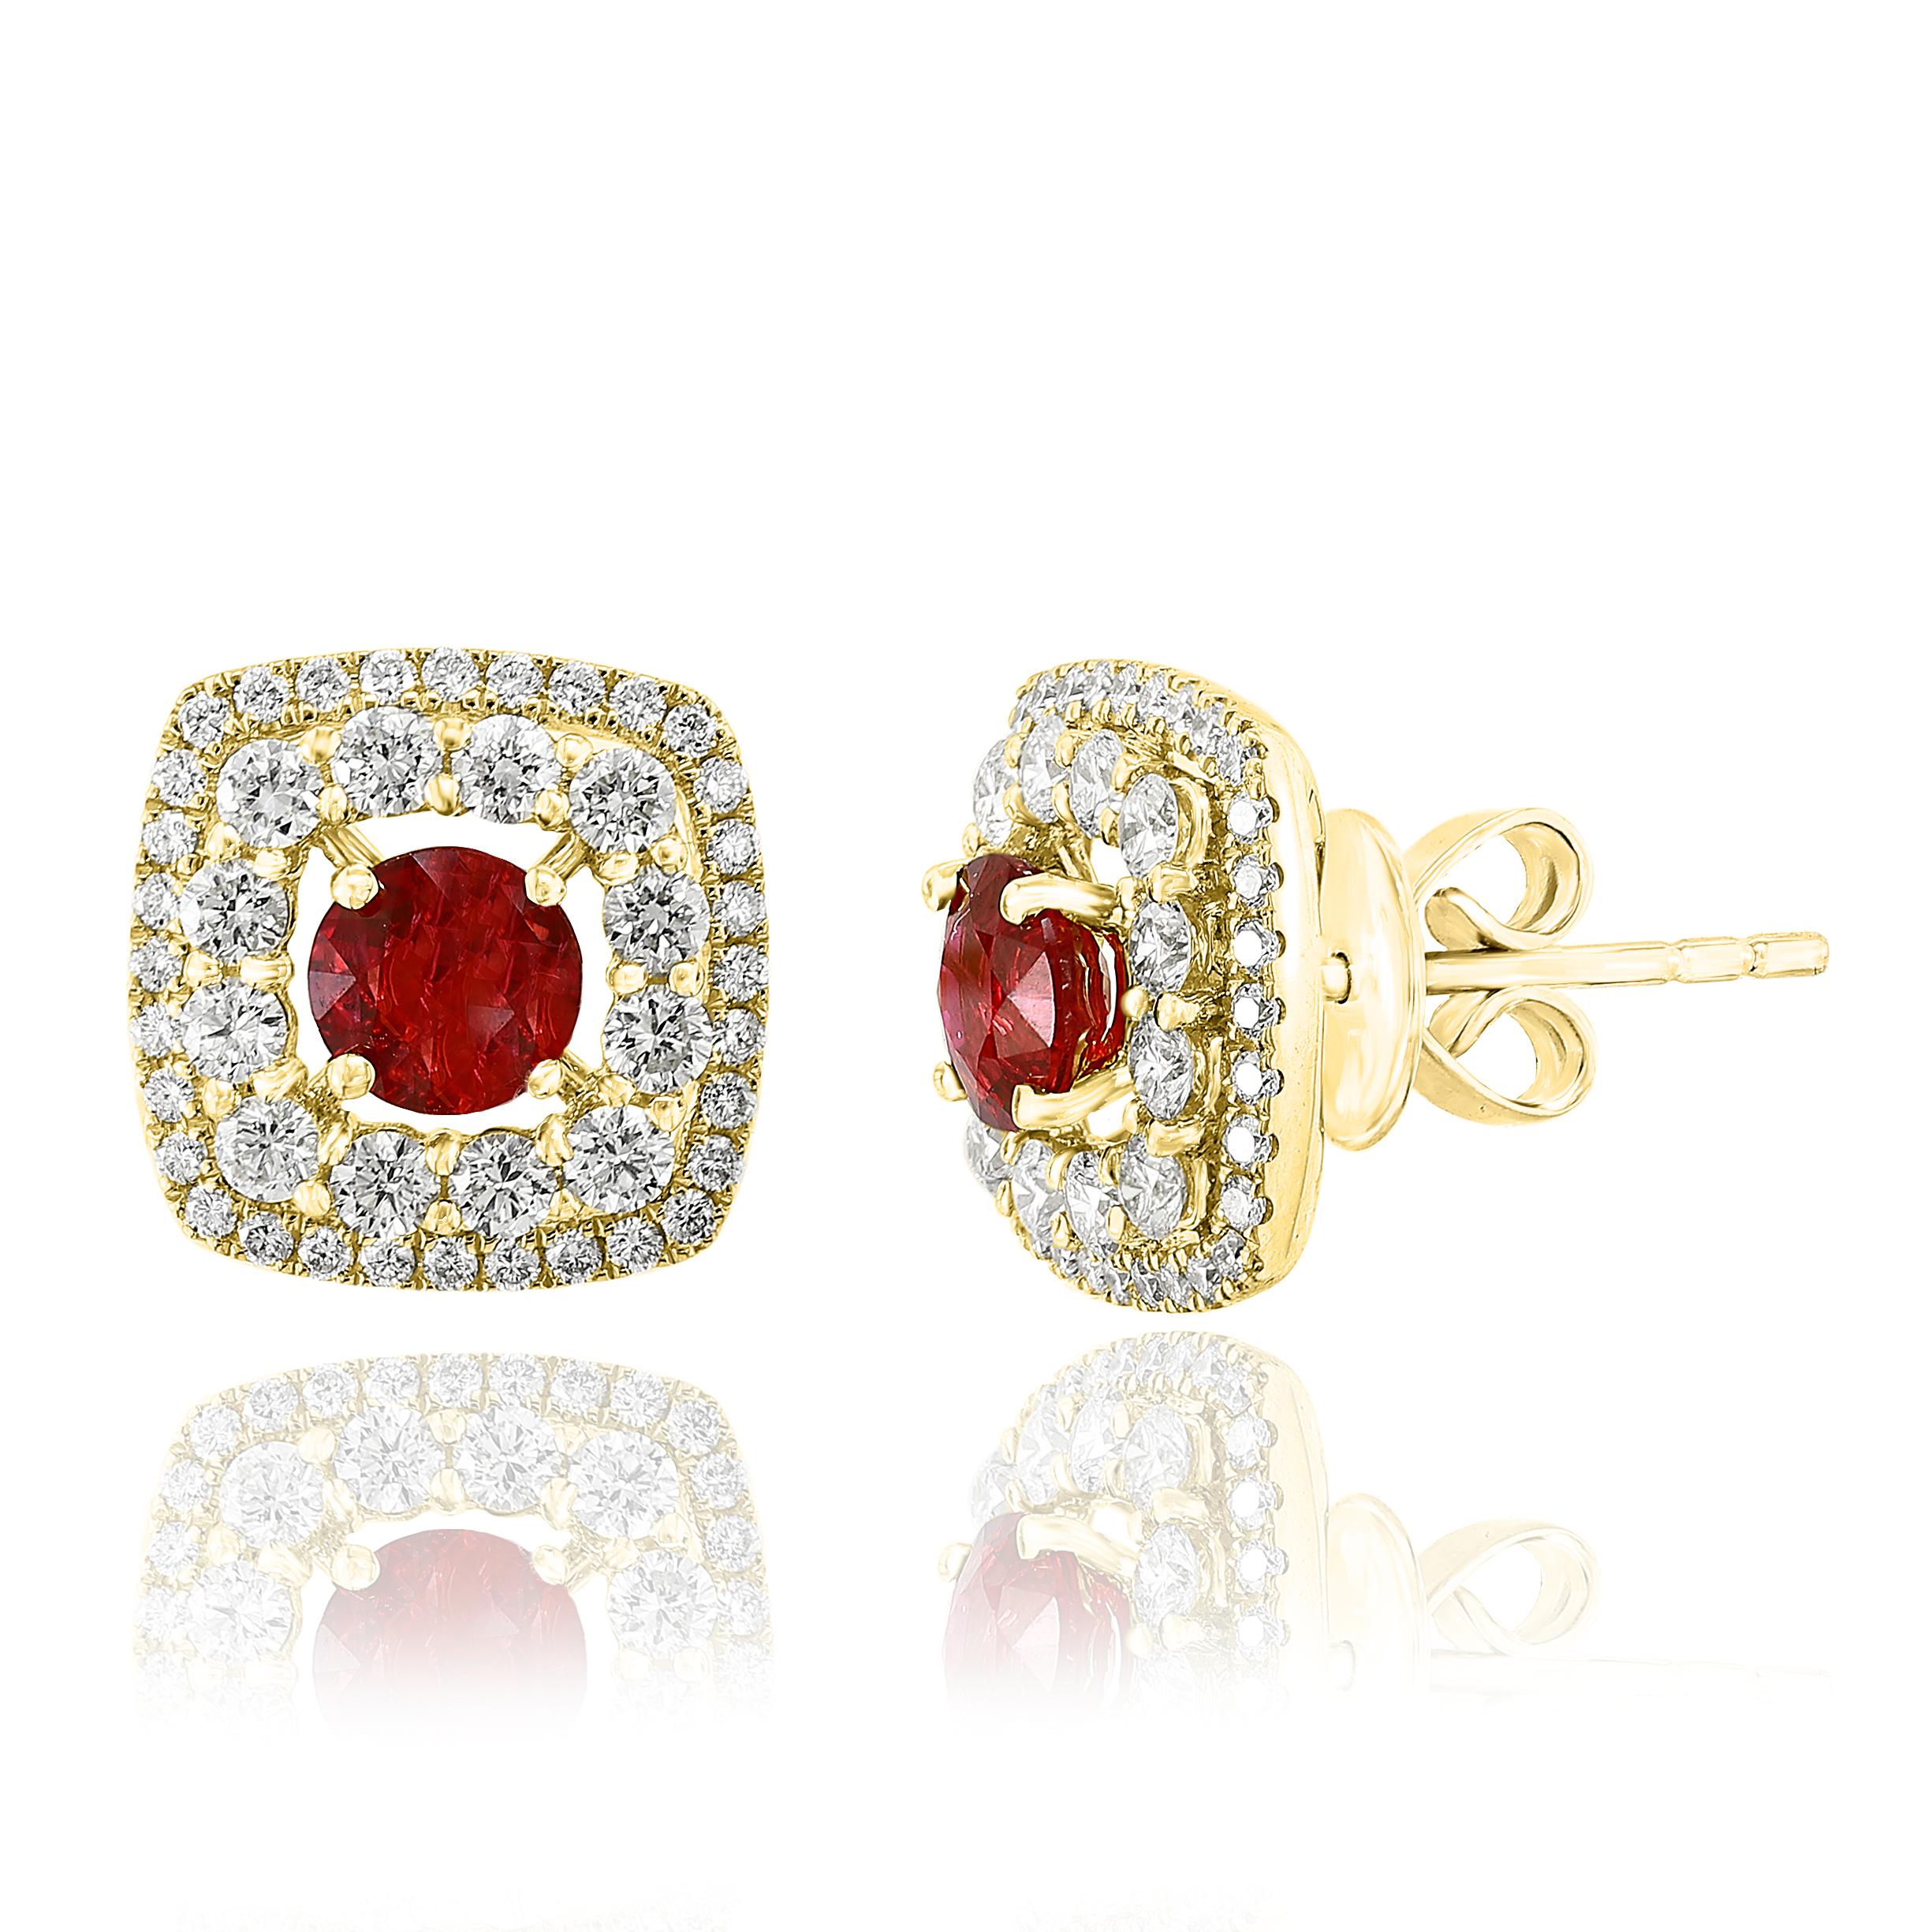 A simple pair of stud earrings showcasing 0.73 carats of round shape 2 red rubies, surrounded by a double row of 88 brilliant round diamonds weighing 1.11 carats and made in 18-karat yellow gold.